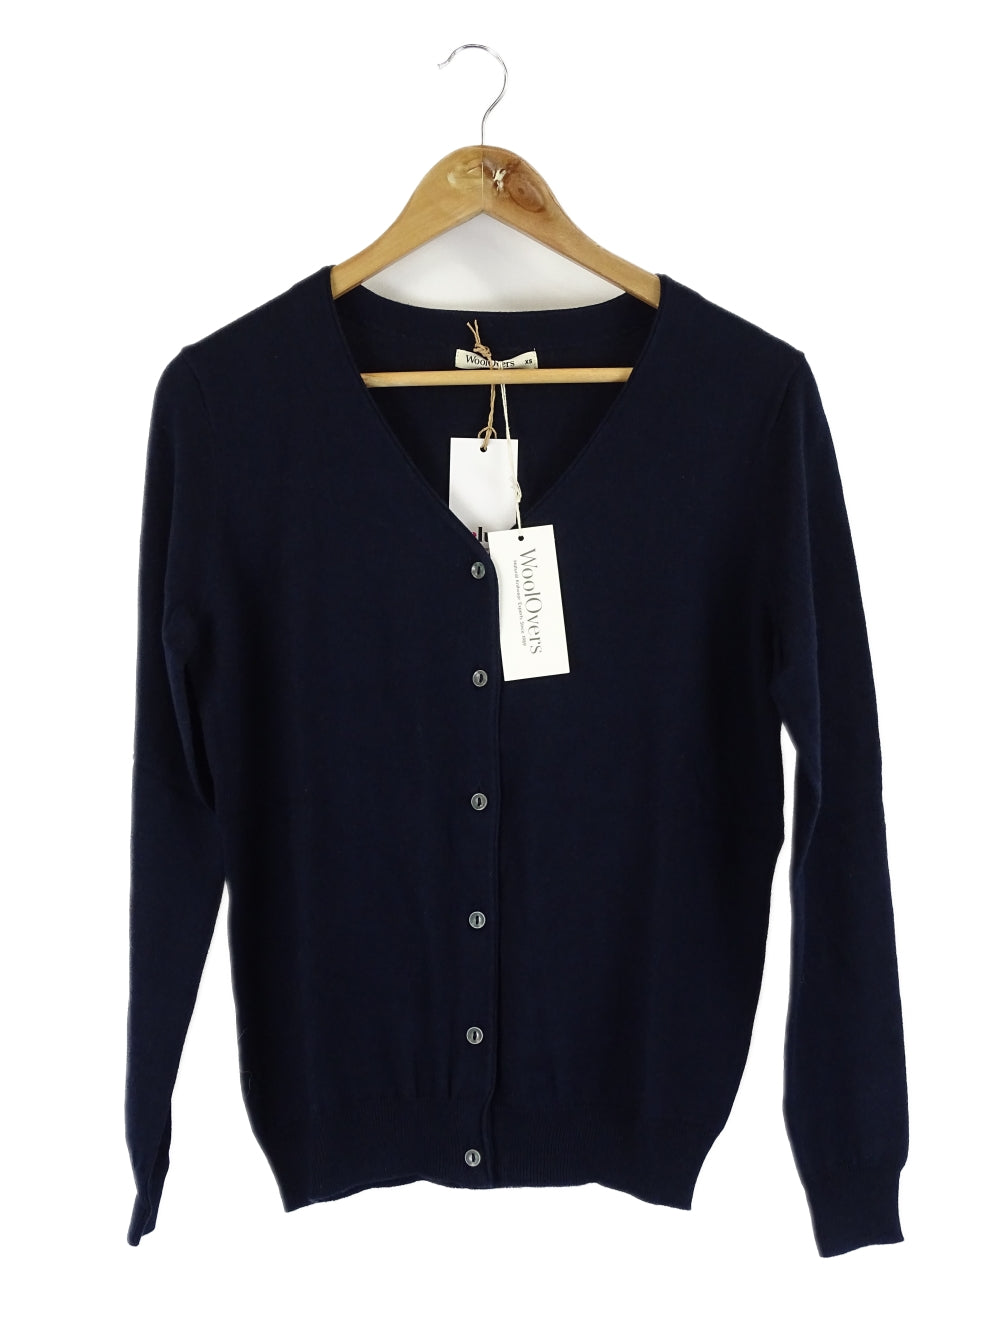 WoolOvers Blue Knit Cardigan XS